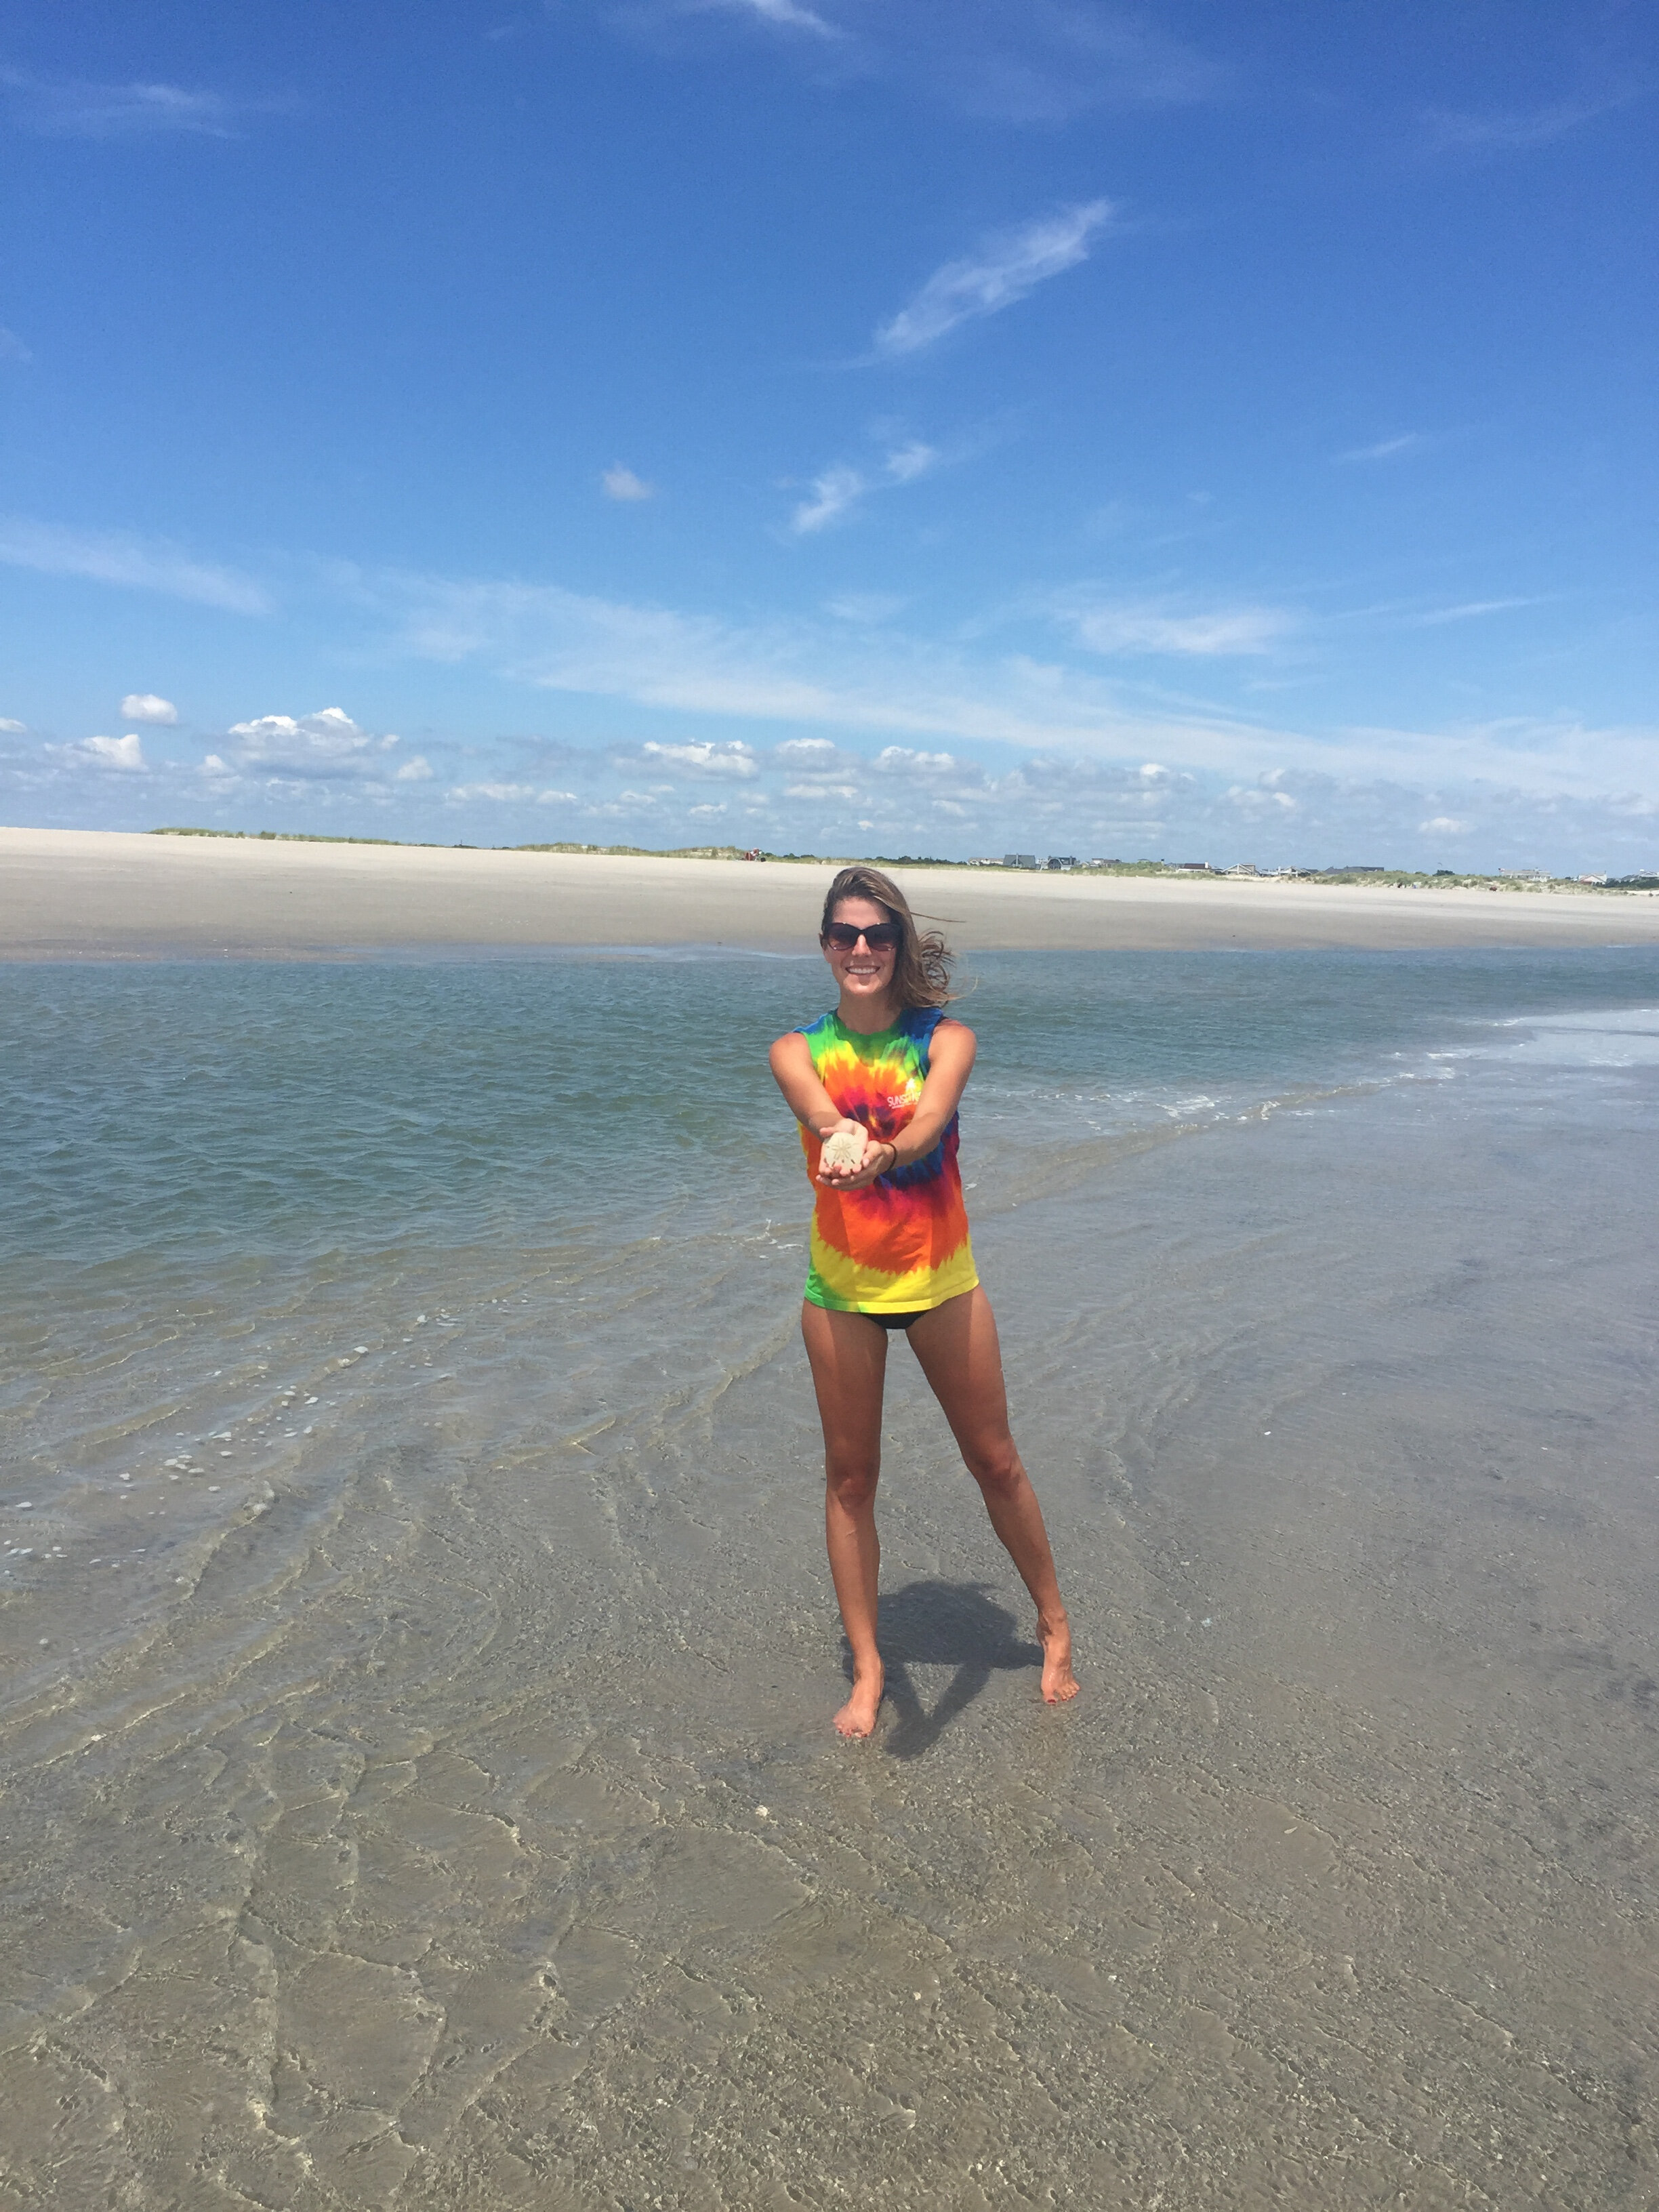 Alison Mastrangelo on “her beach” with Stone Harbor in  the background.